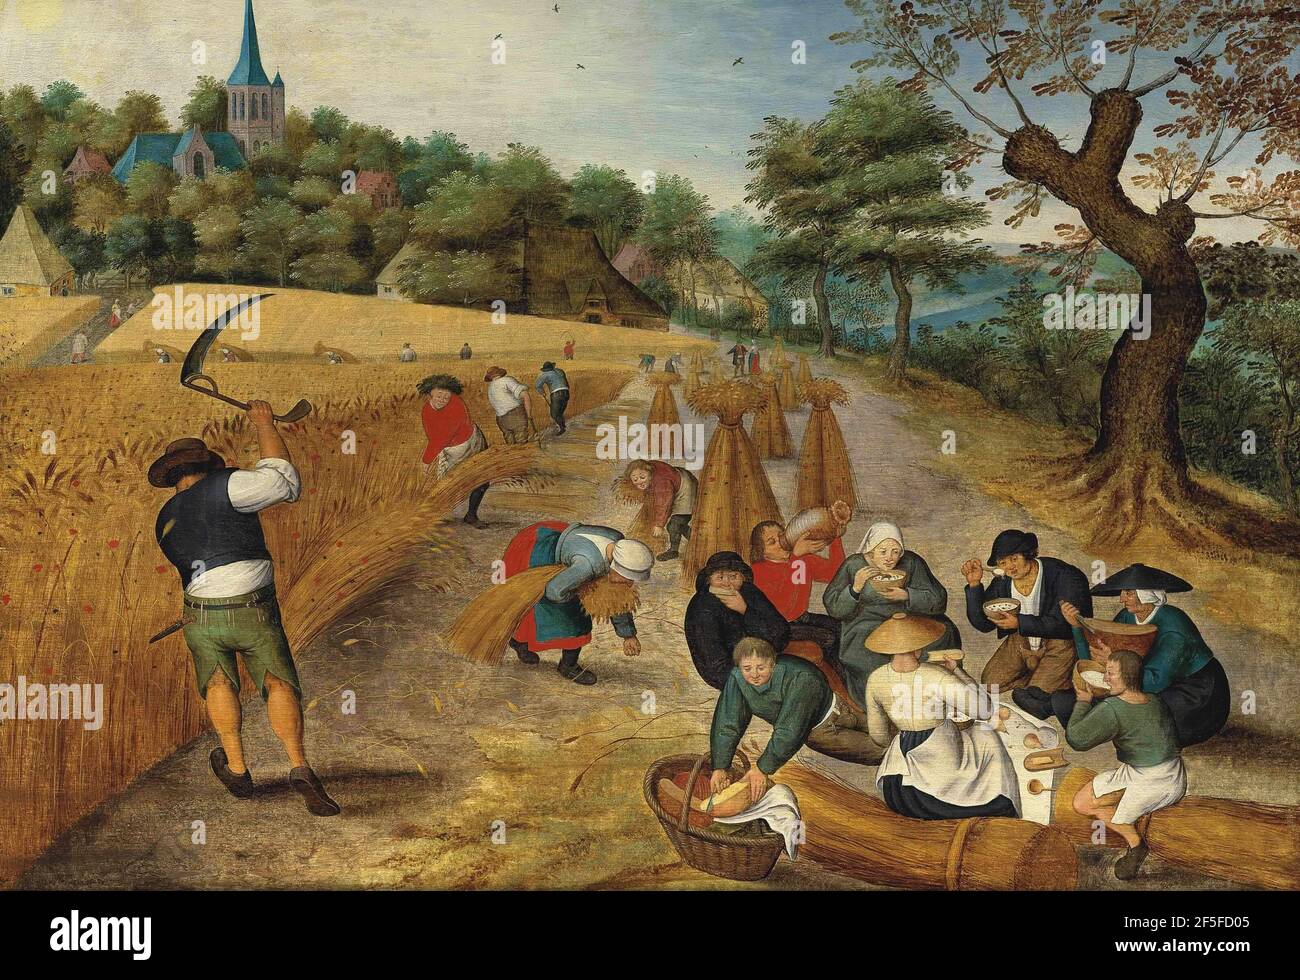 Title: Summer The Harvesters Creator:  Pieter Bruegel the Elder Date: 1623 Medium: Oil on panel Dimensions: Private collection Location: 73x104.1 cms Stock Photo